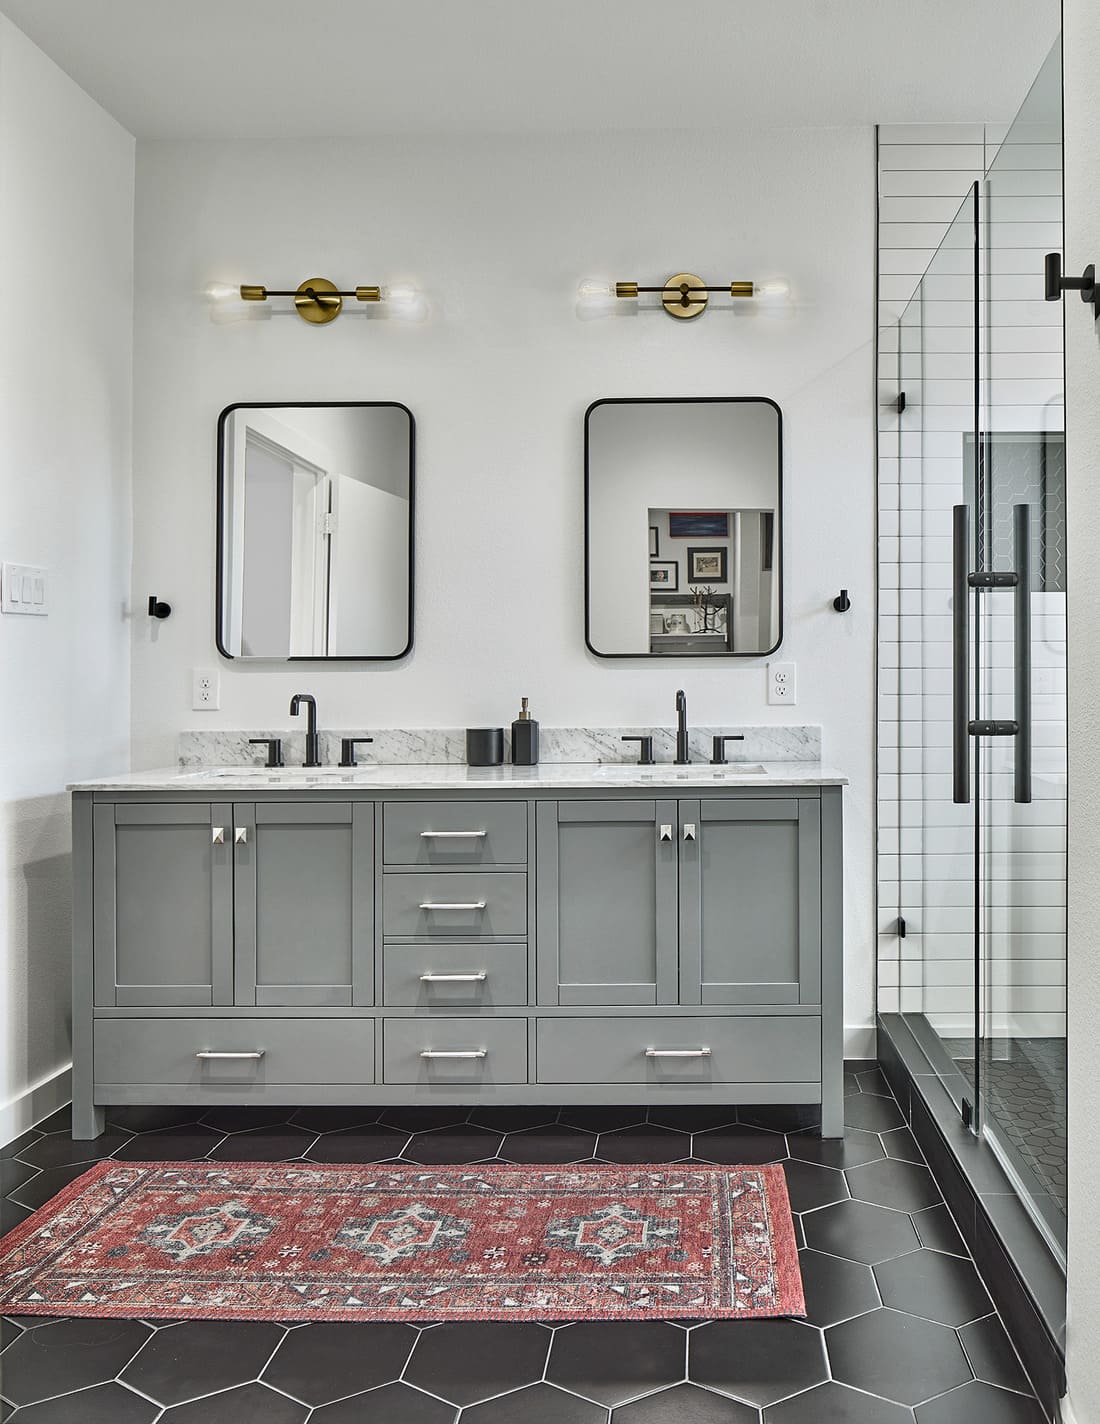 Double vanity in Dallas bathroom remodel with black faucet fixtures by Sardone | McLain